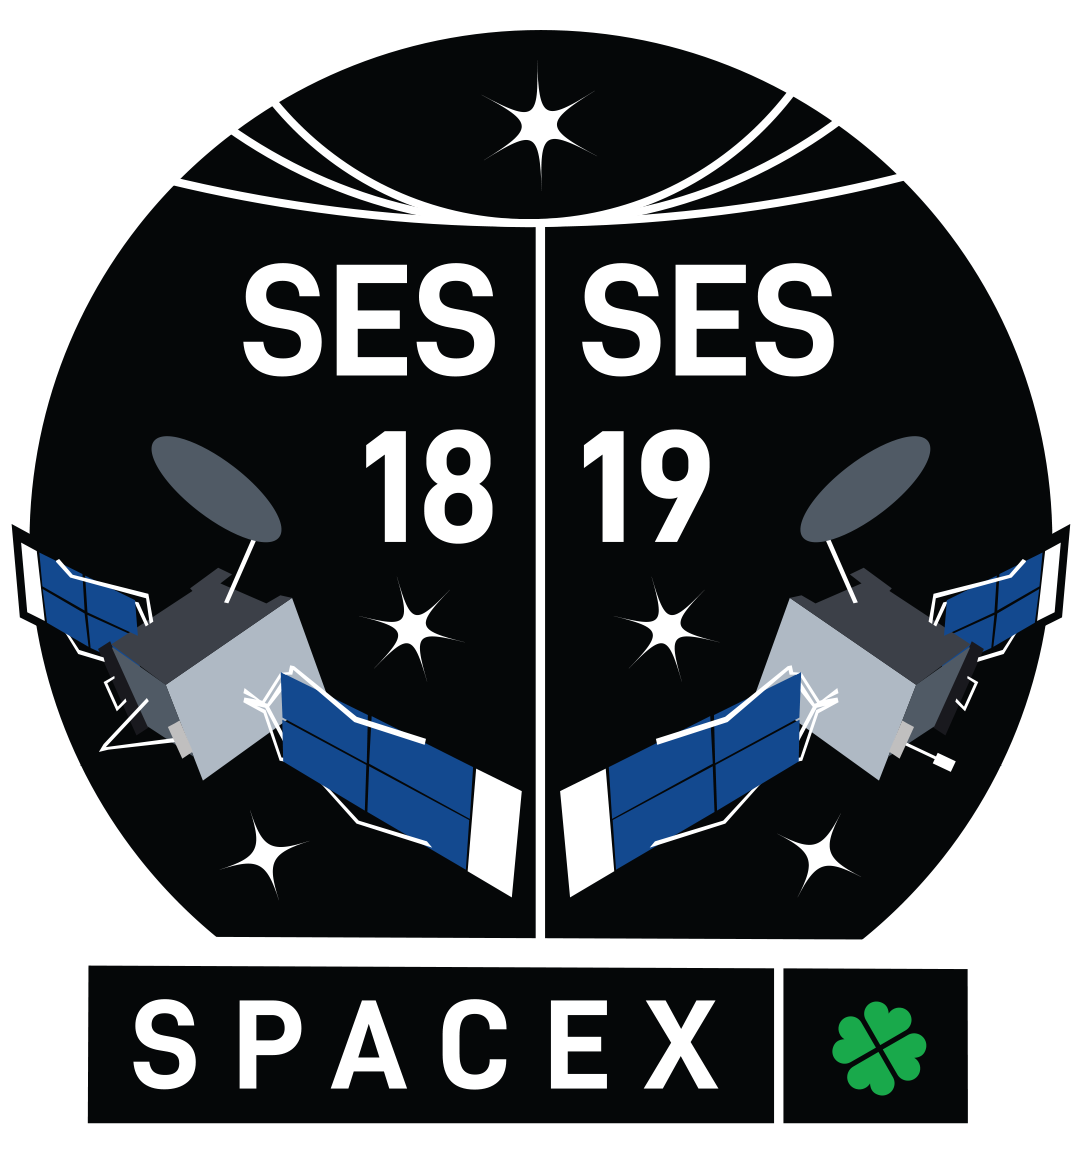 Mission patch for SES-18 & SES-19